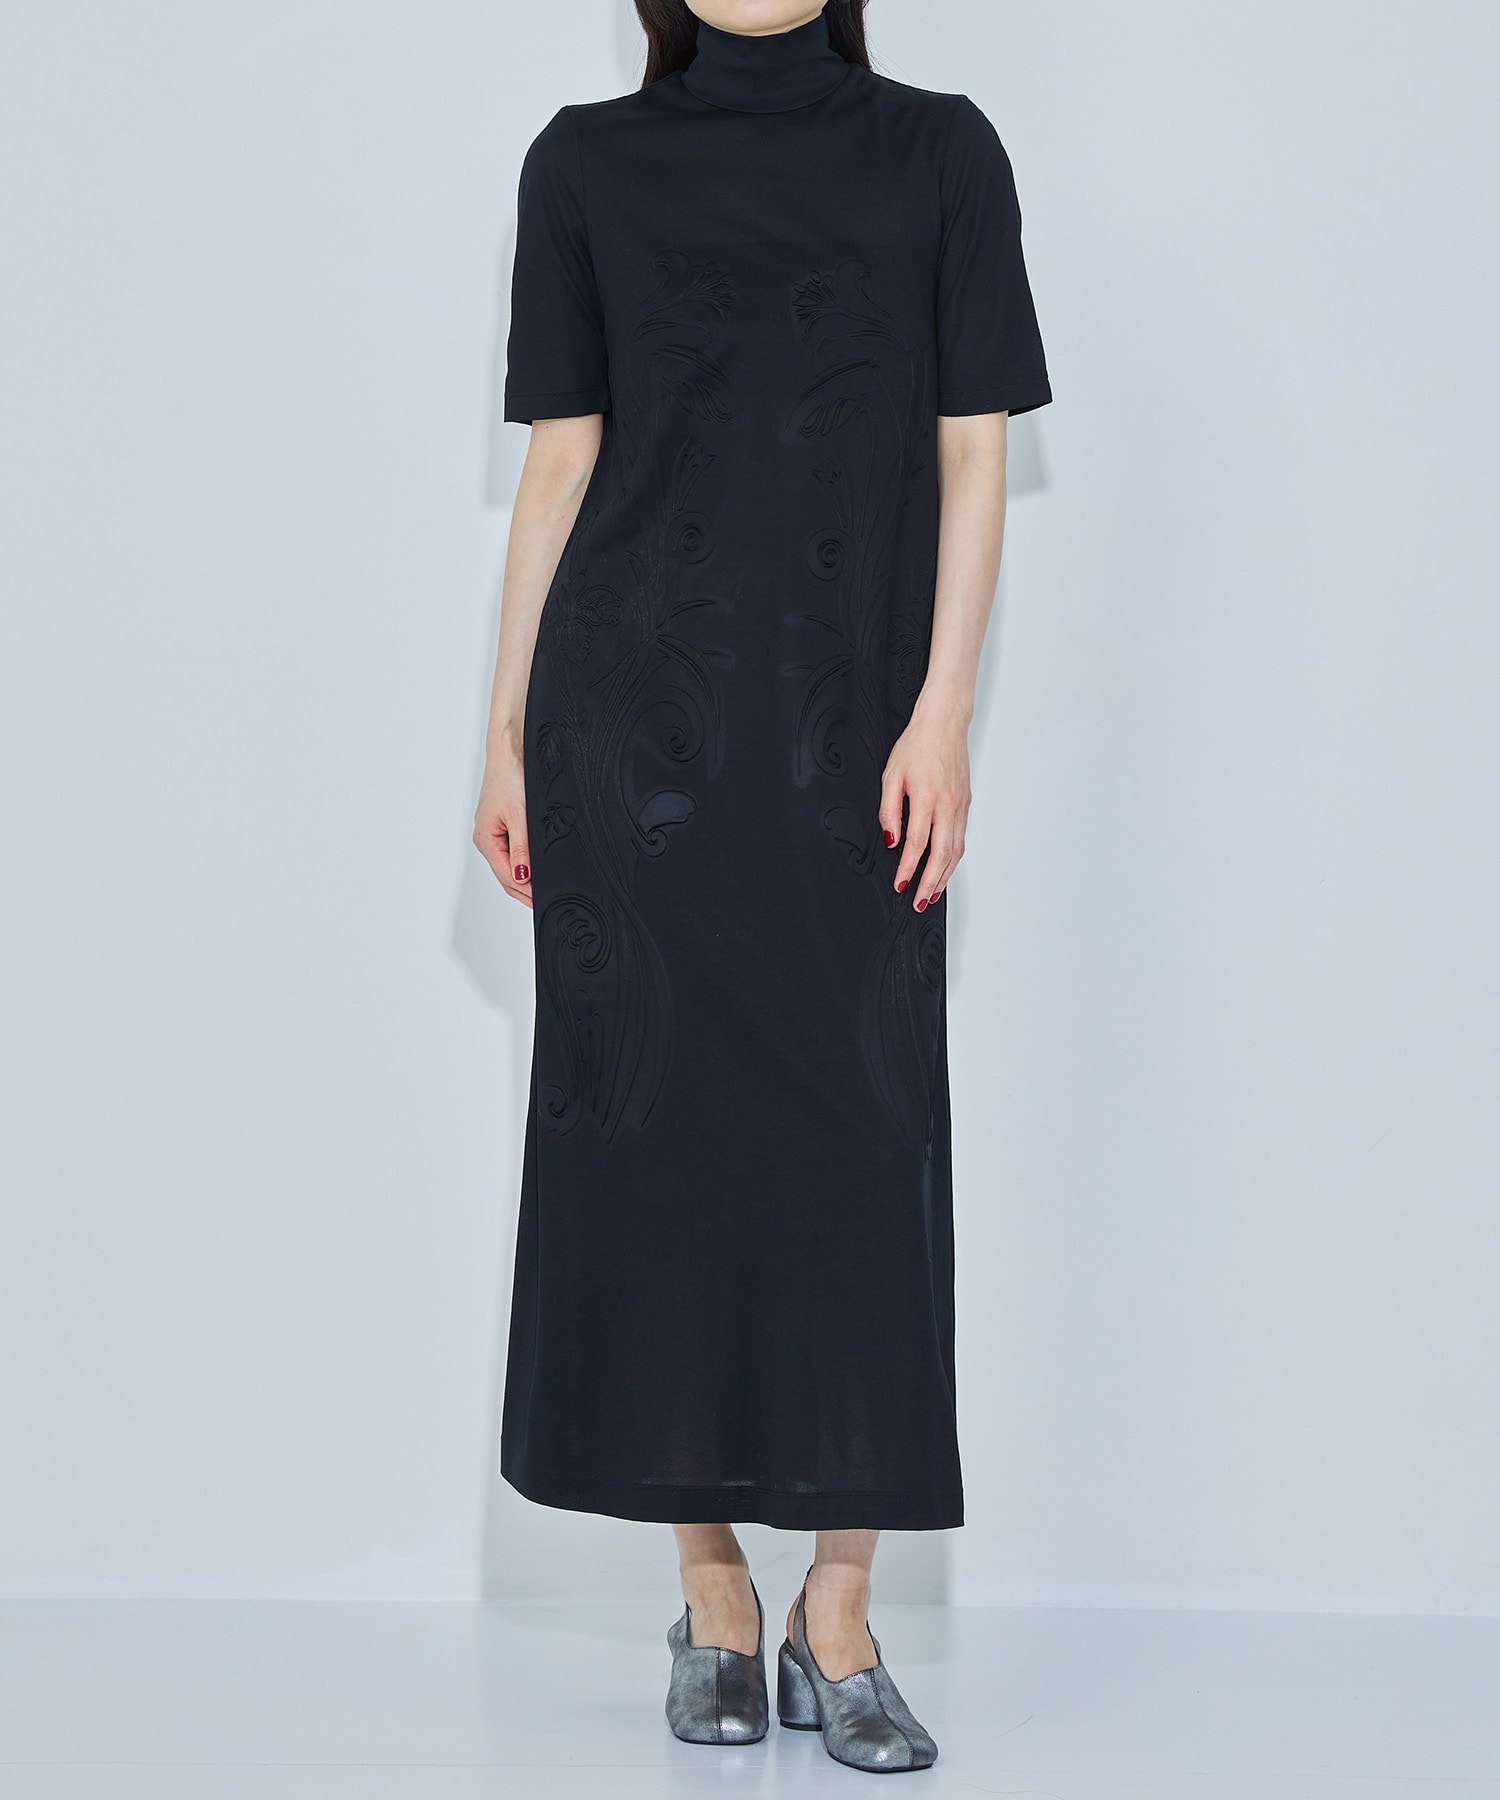 Floral Embossed Cotton Jersey A-Line Dress